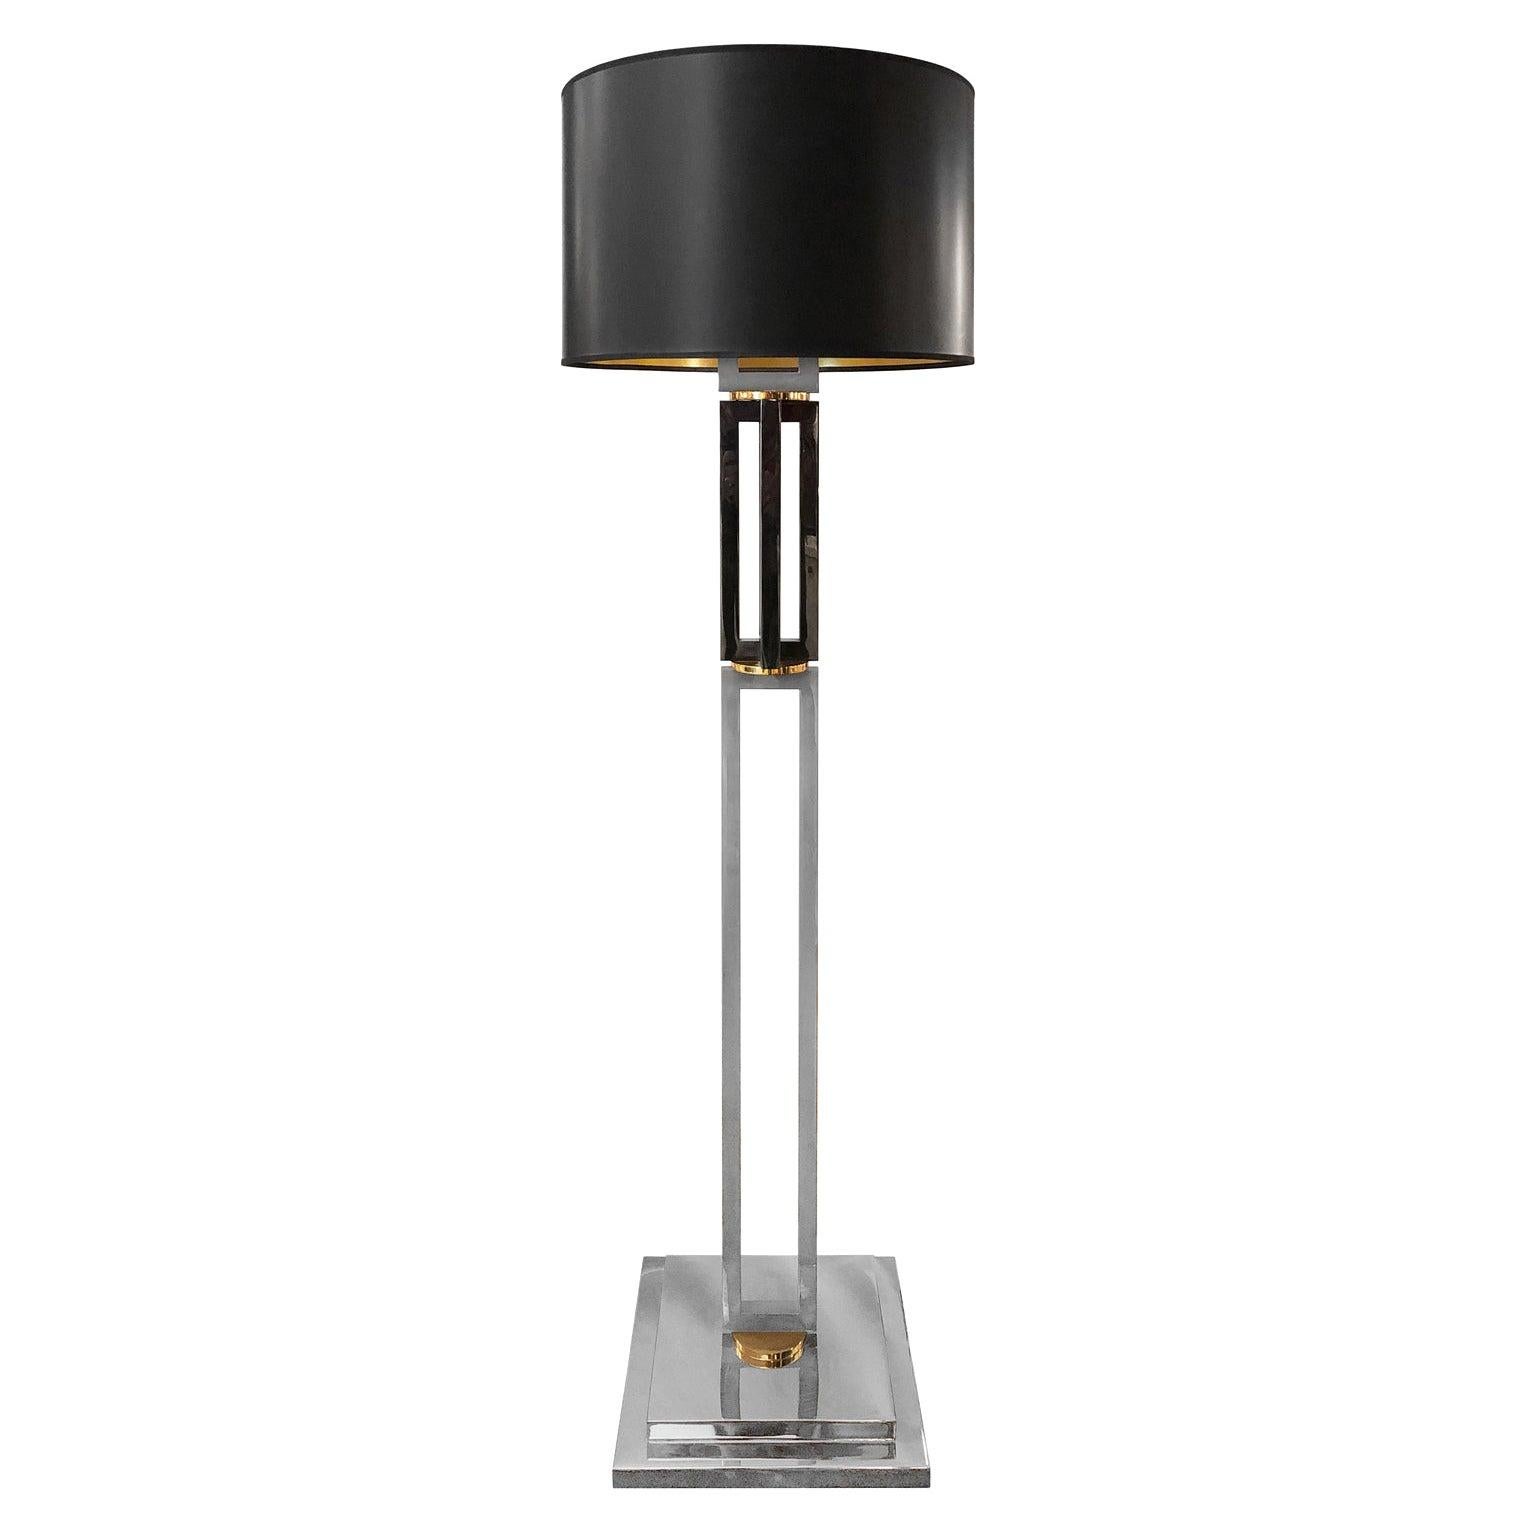 Gunmetal and chrome double column floor lamp with brass detail and original black drum shade, USA, 1970s.
        